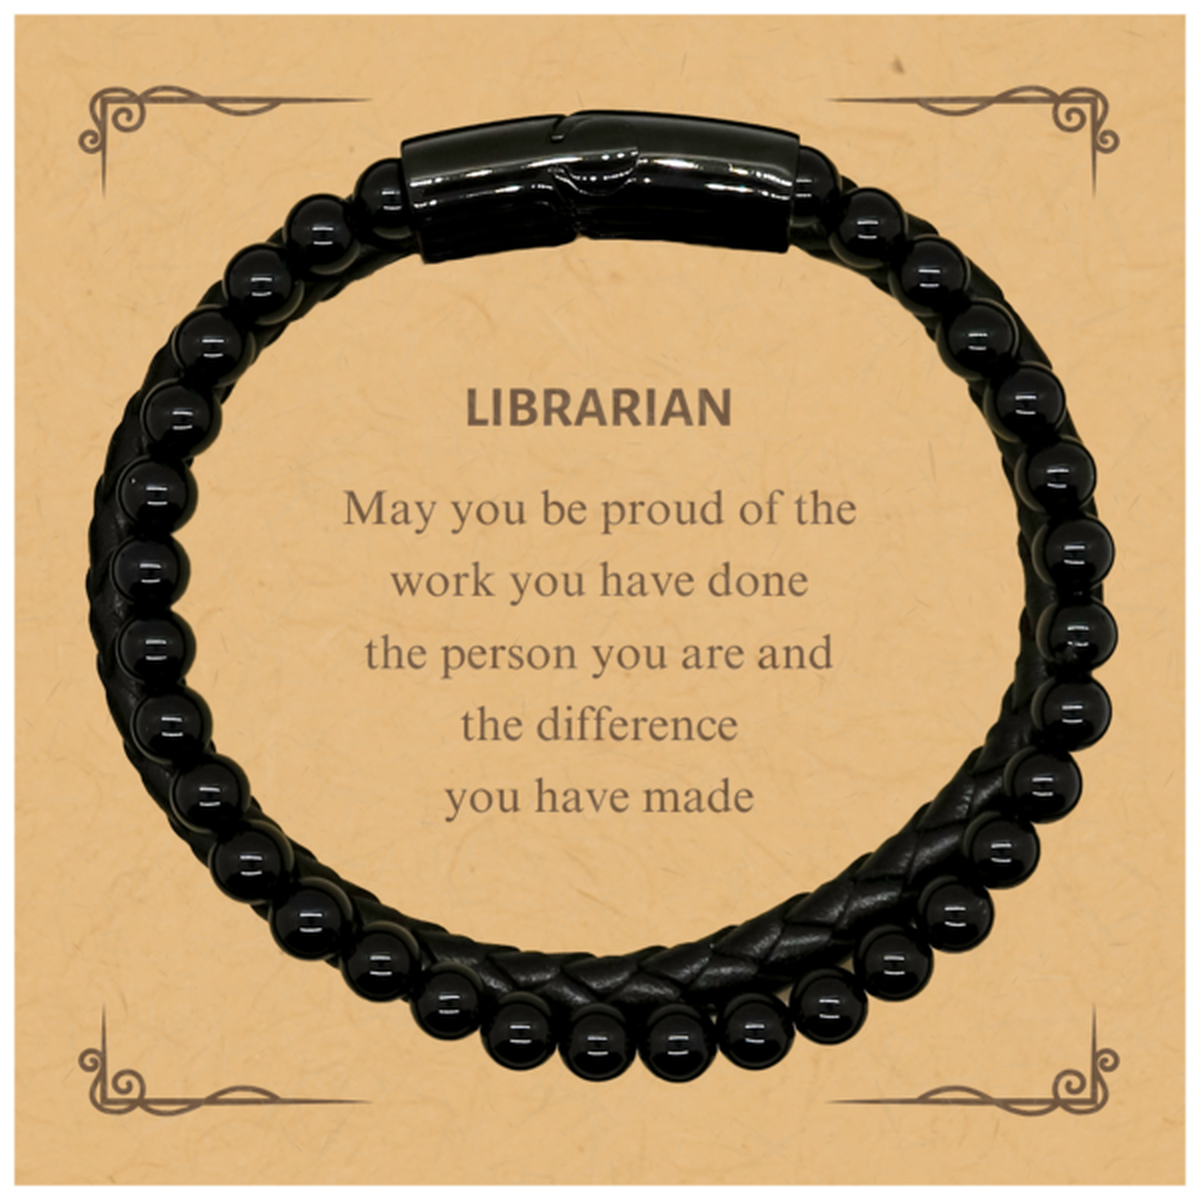 Librarian May you be proud of the work you have done, Retirement Librarian Stone Leather Bracelets for Colleague Appreciation Gifts Amazing for Librarian